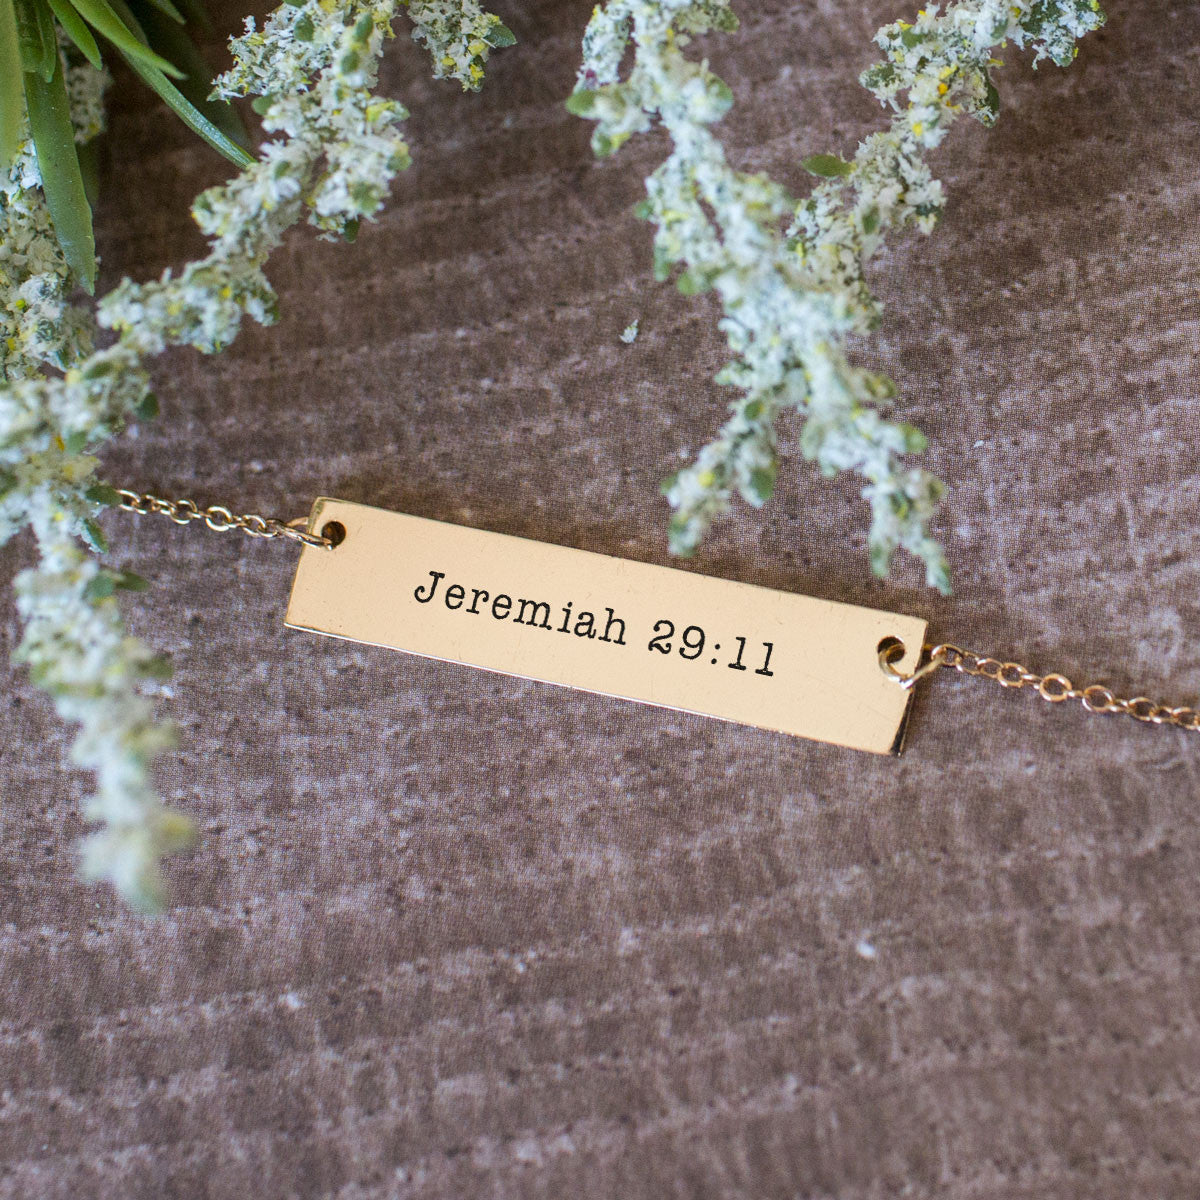 Jeremiah 29:11 Gold / Silver Bar Necklace